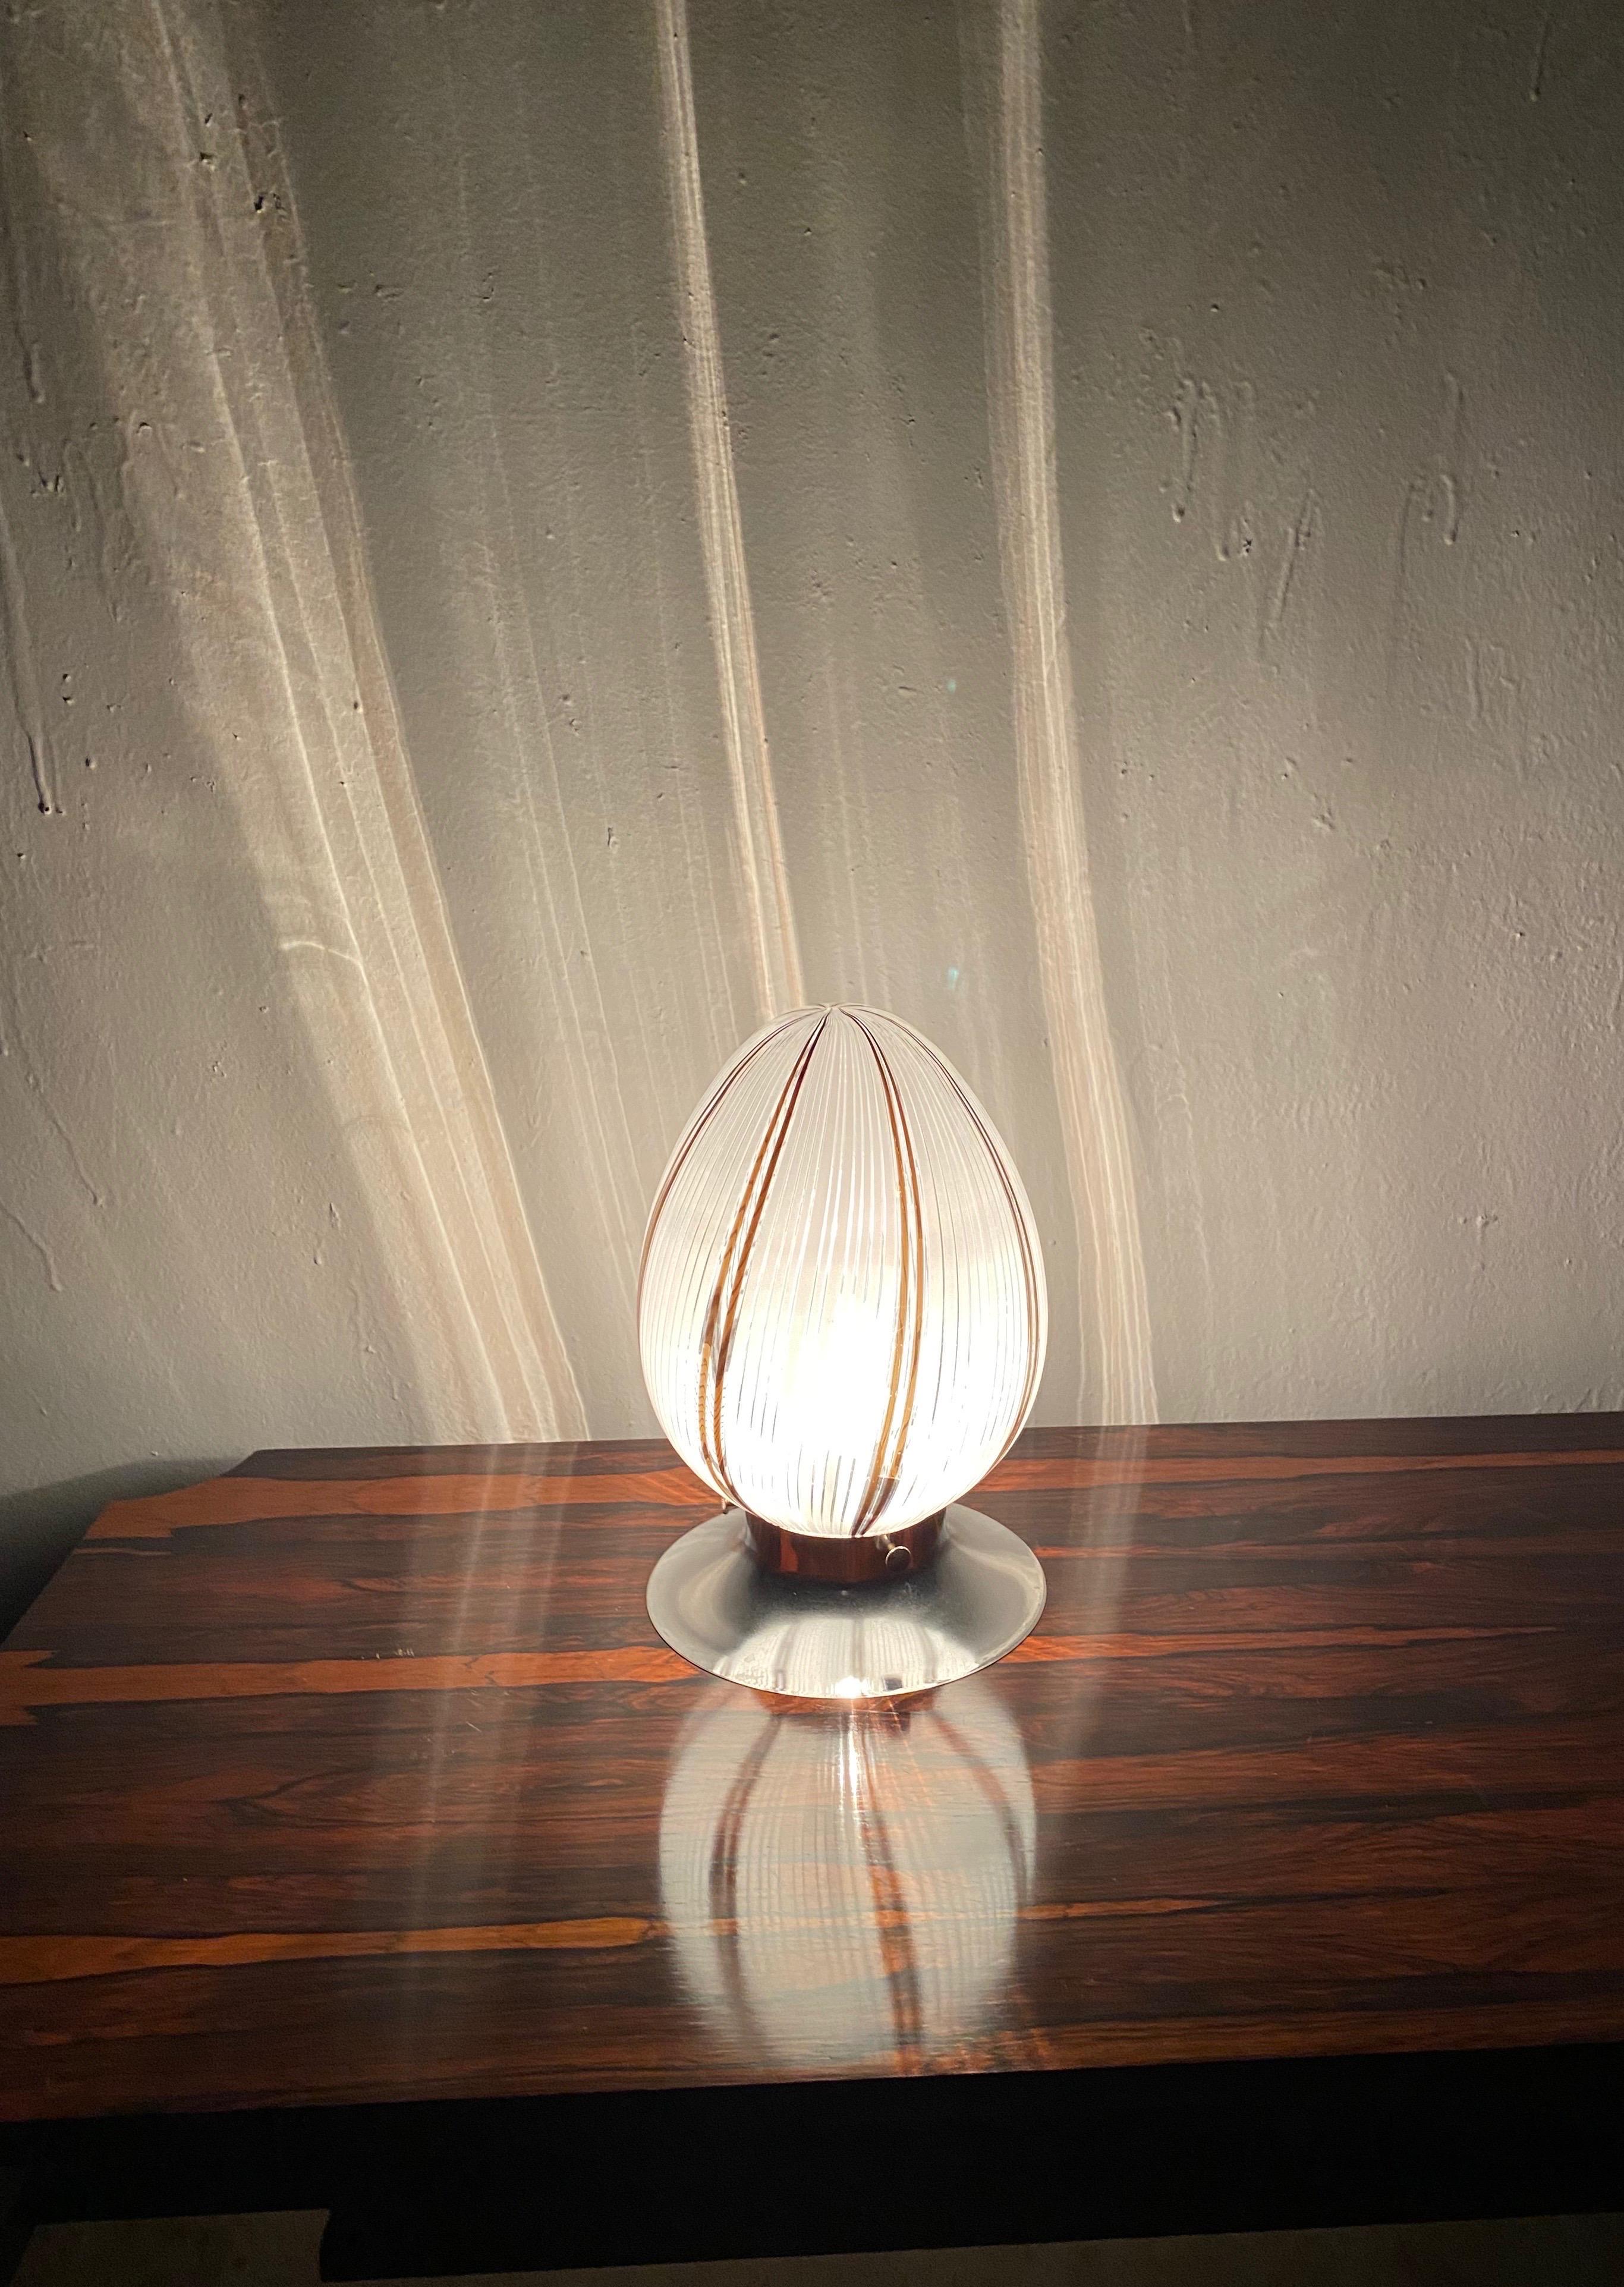 Pair of Mid-Century Modern Table Lamps Attributed to Venini, Murano, circa 1980 For Sale 3